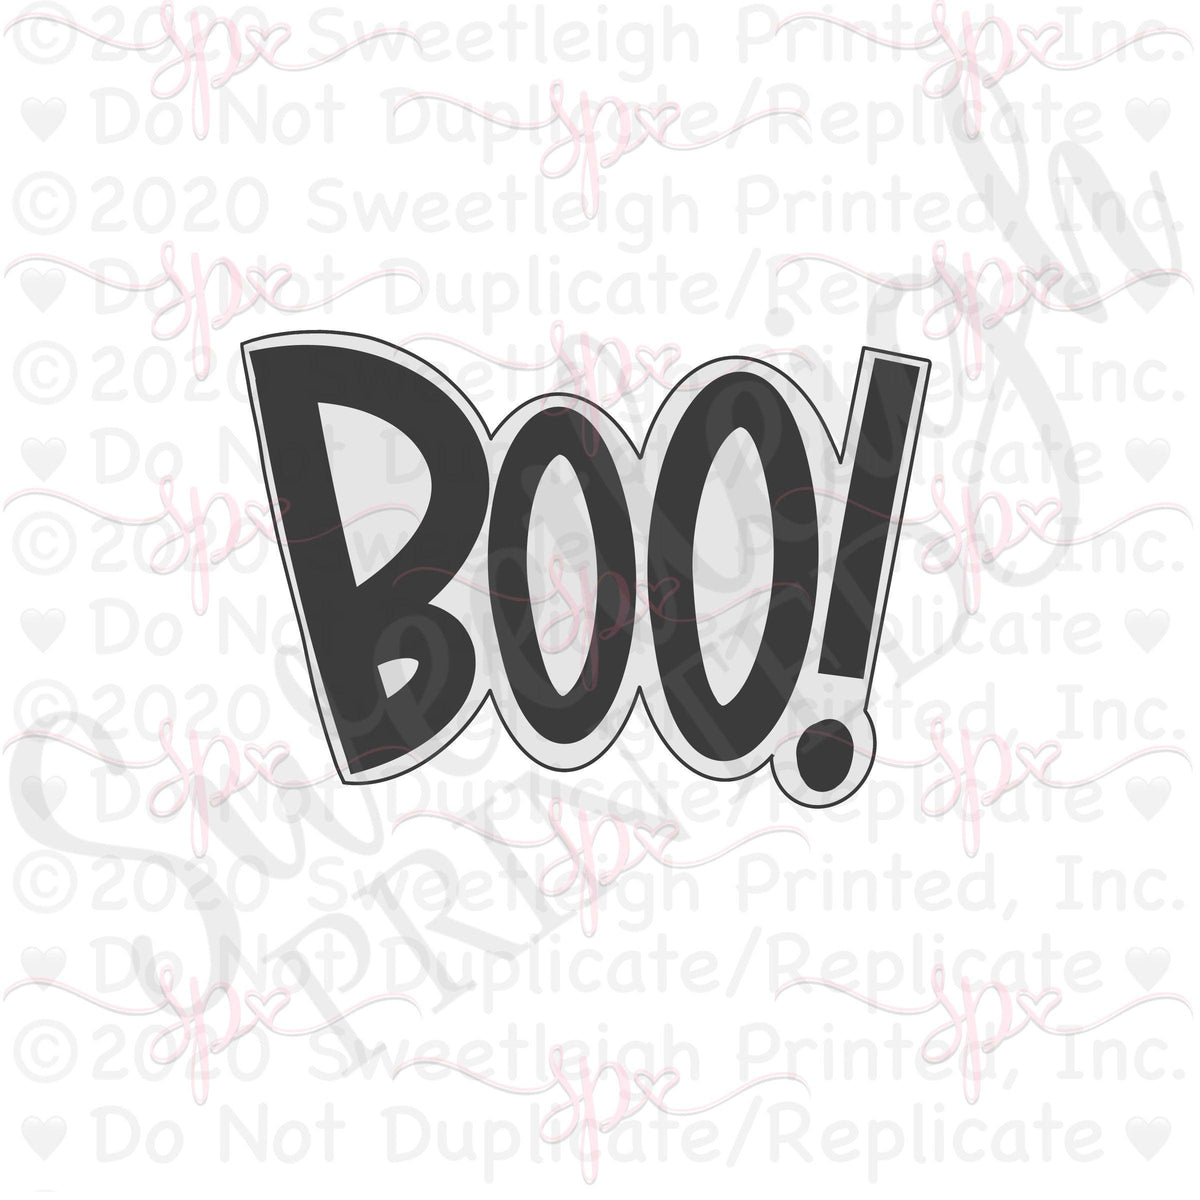 Boo! Hand Lettered Cookie Cutter - Sweetleigh 